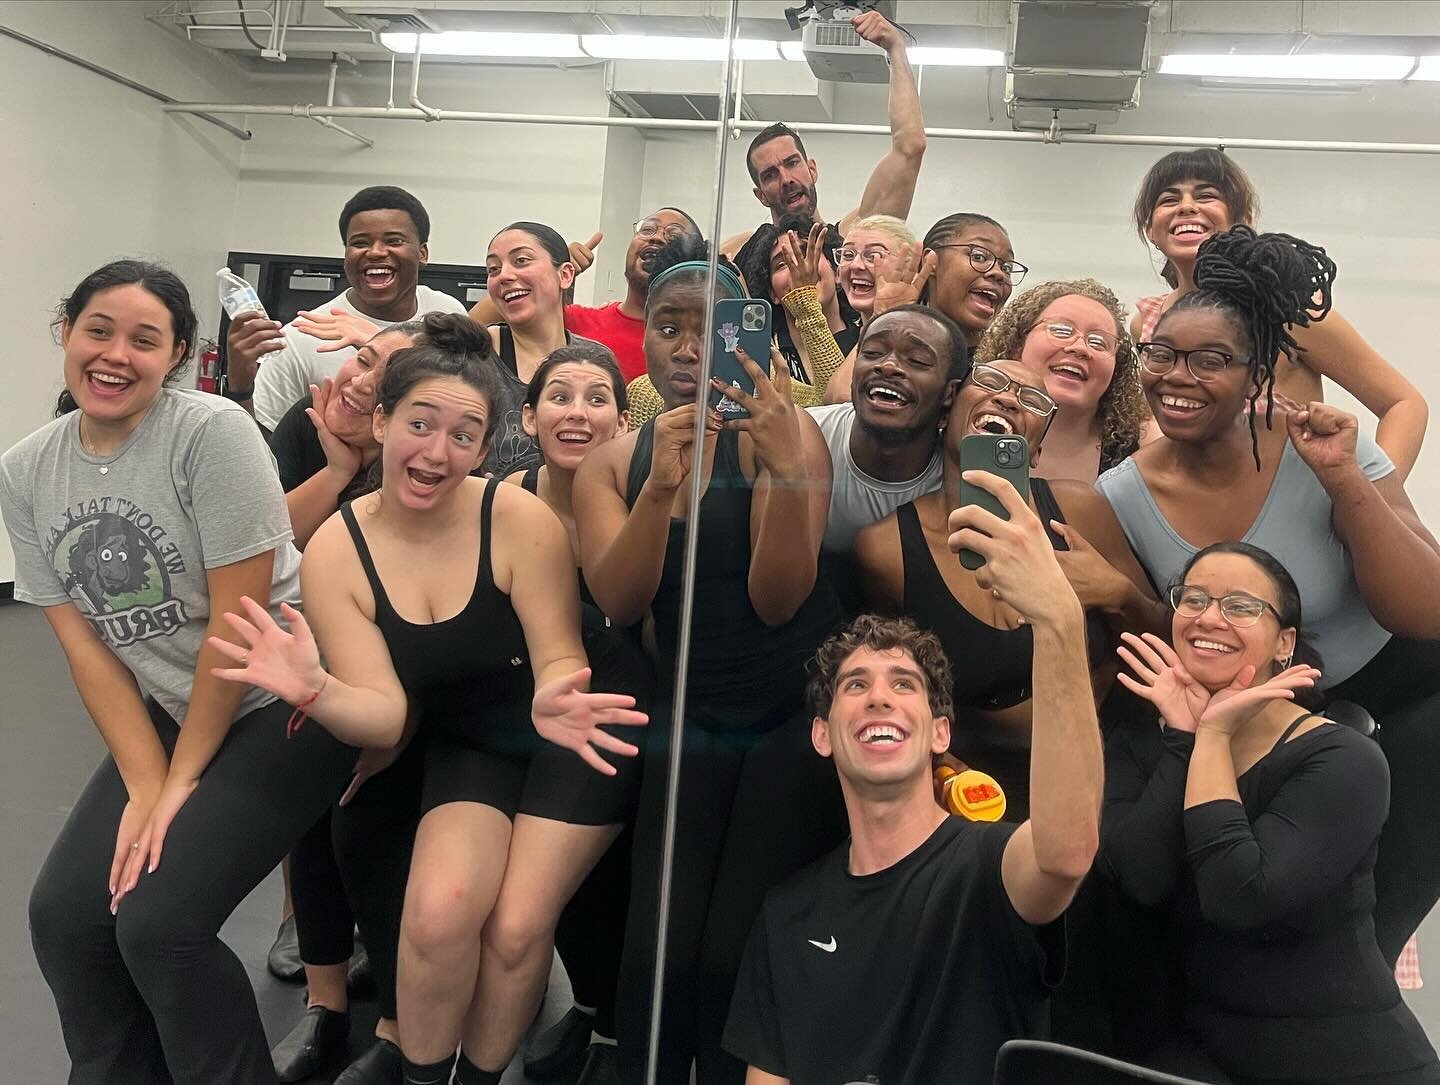 Wonderful Masterclass today with Timothy Hughes! Thank you so much for the class, and for the Open Jar Opportunity! 

#nwsa #broadwaydance